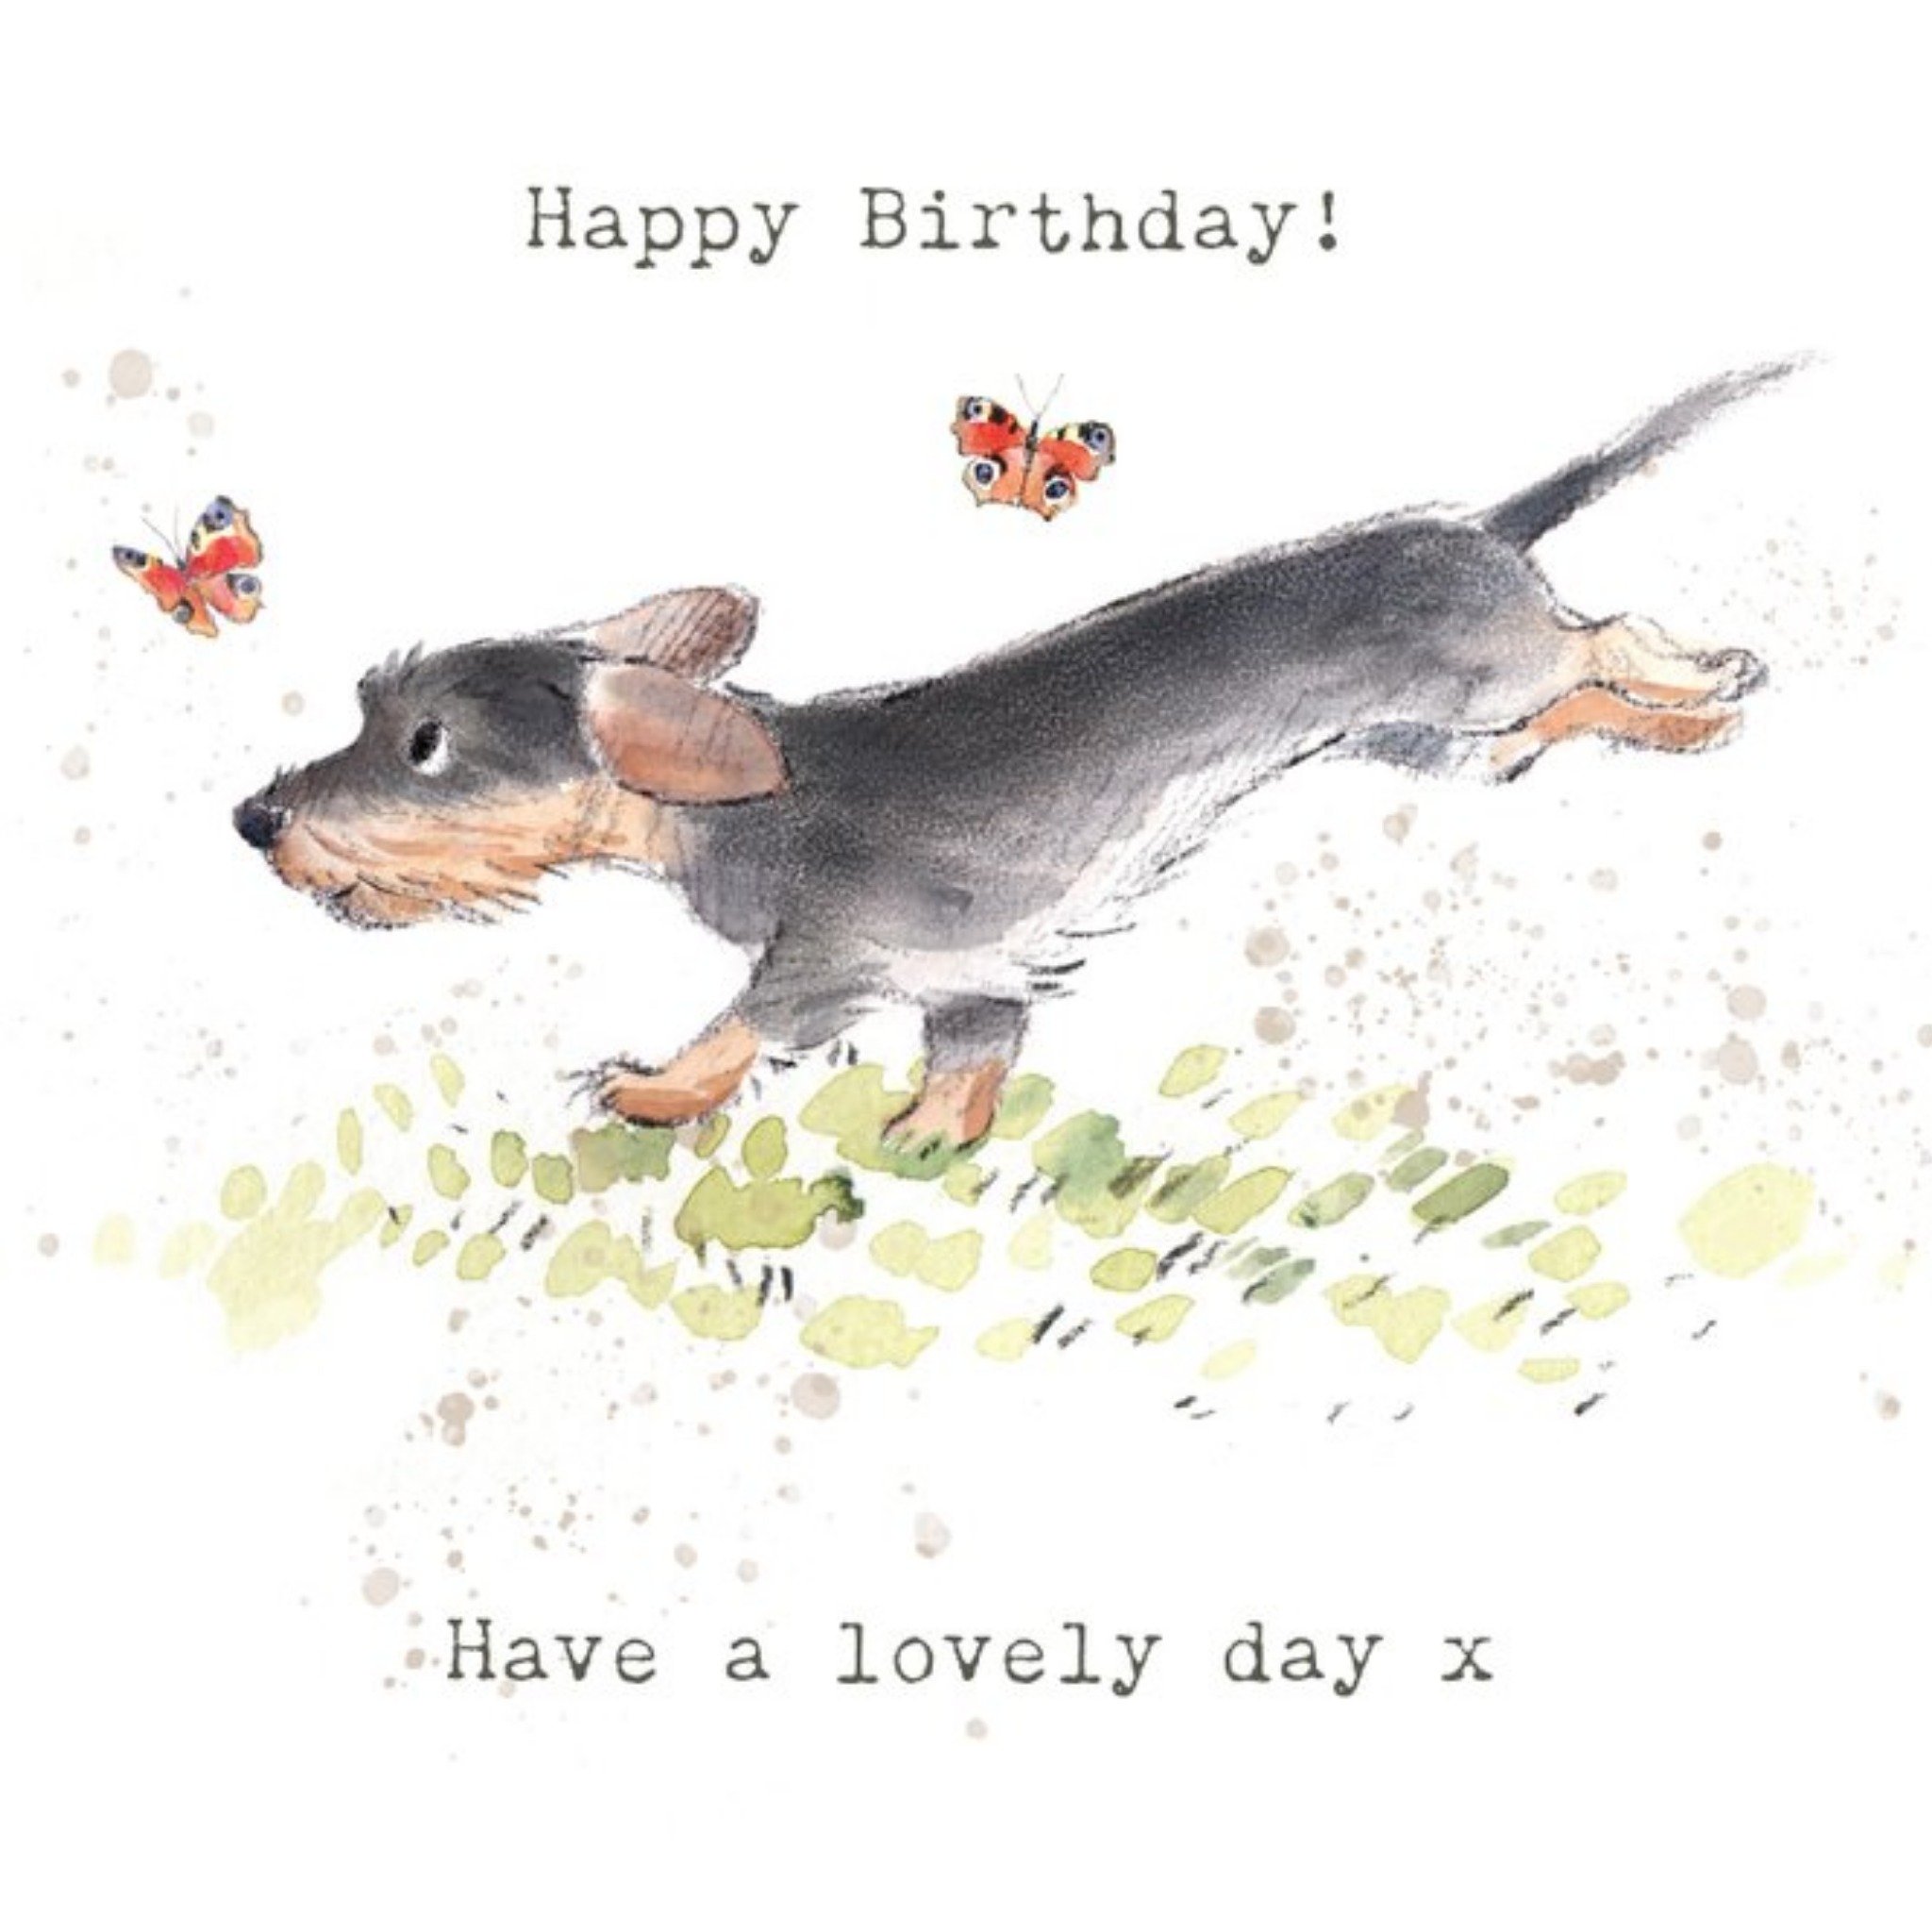 Moonpig Illustration Of A Cute Dog Chasing Butterflies Birthday Card, Large